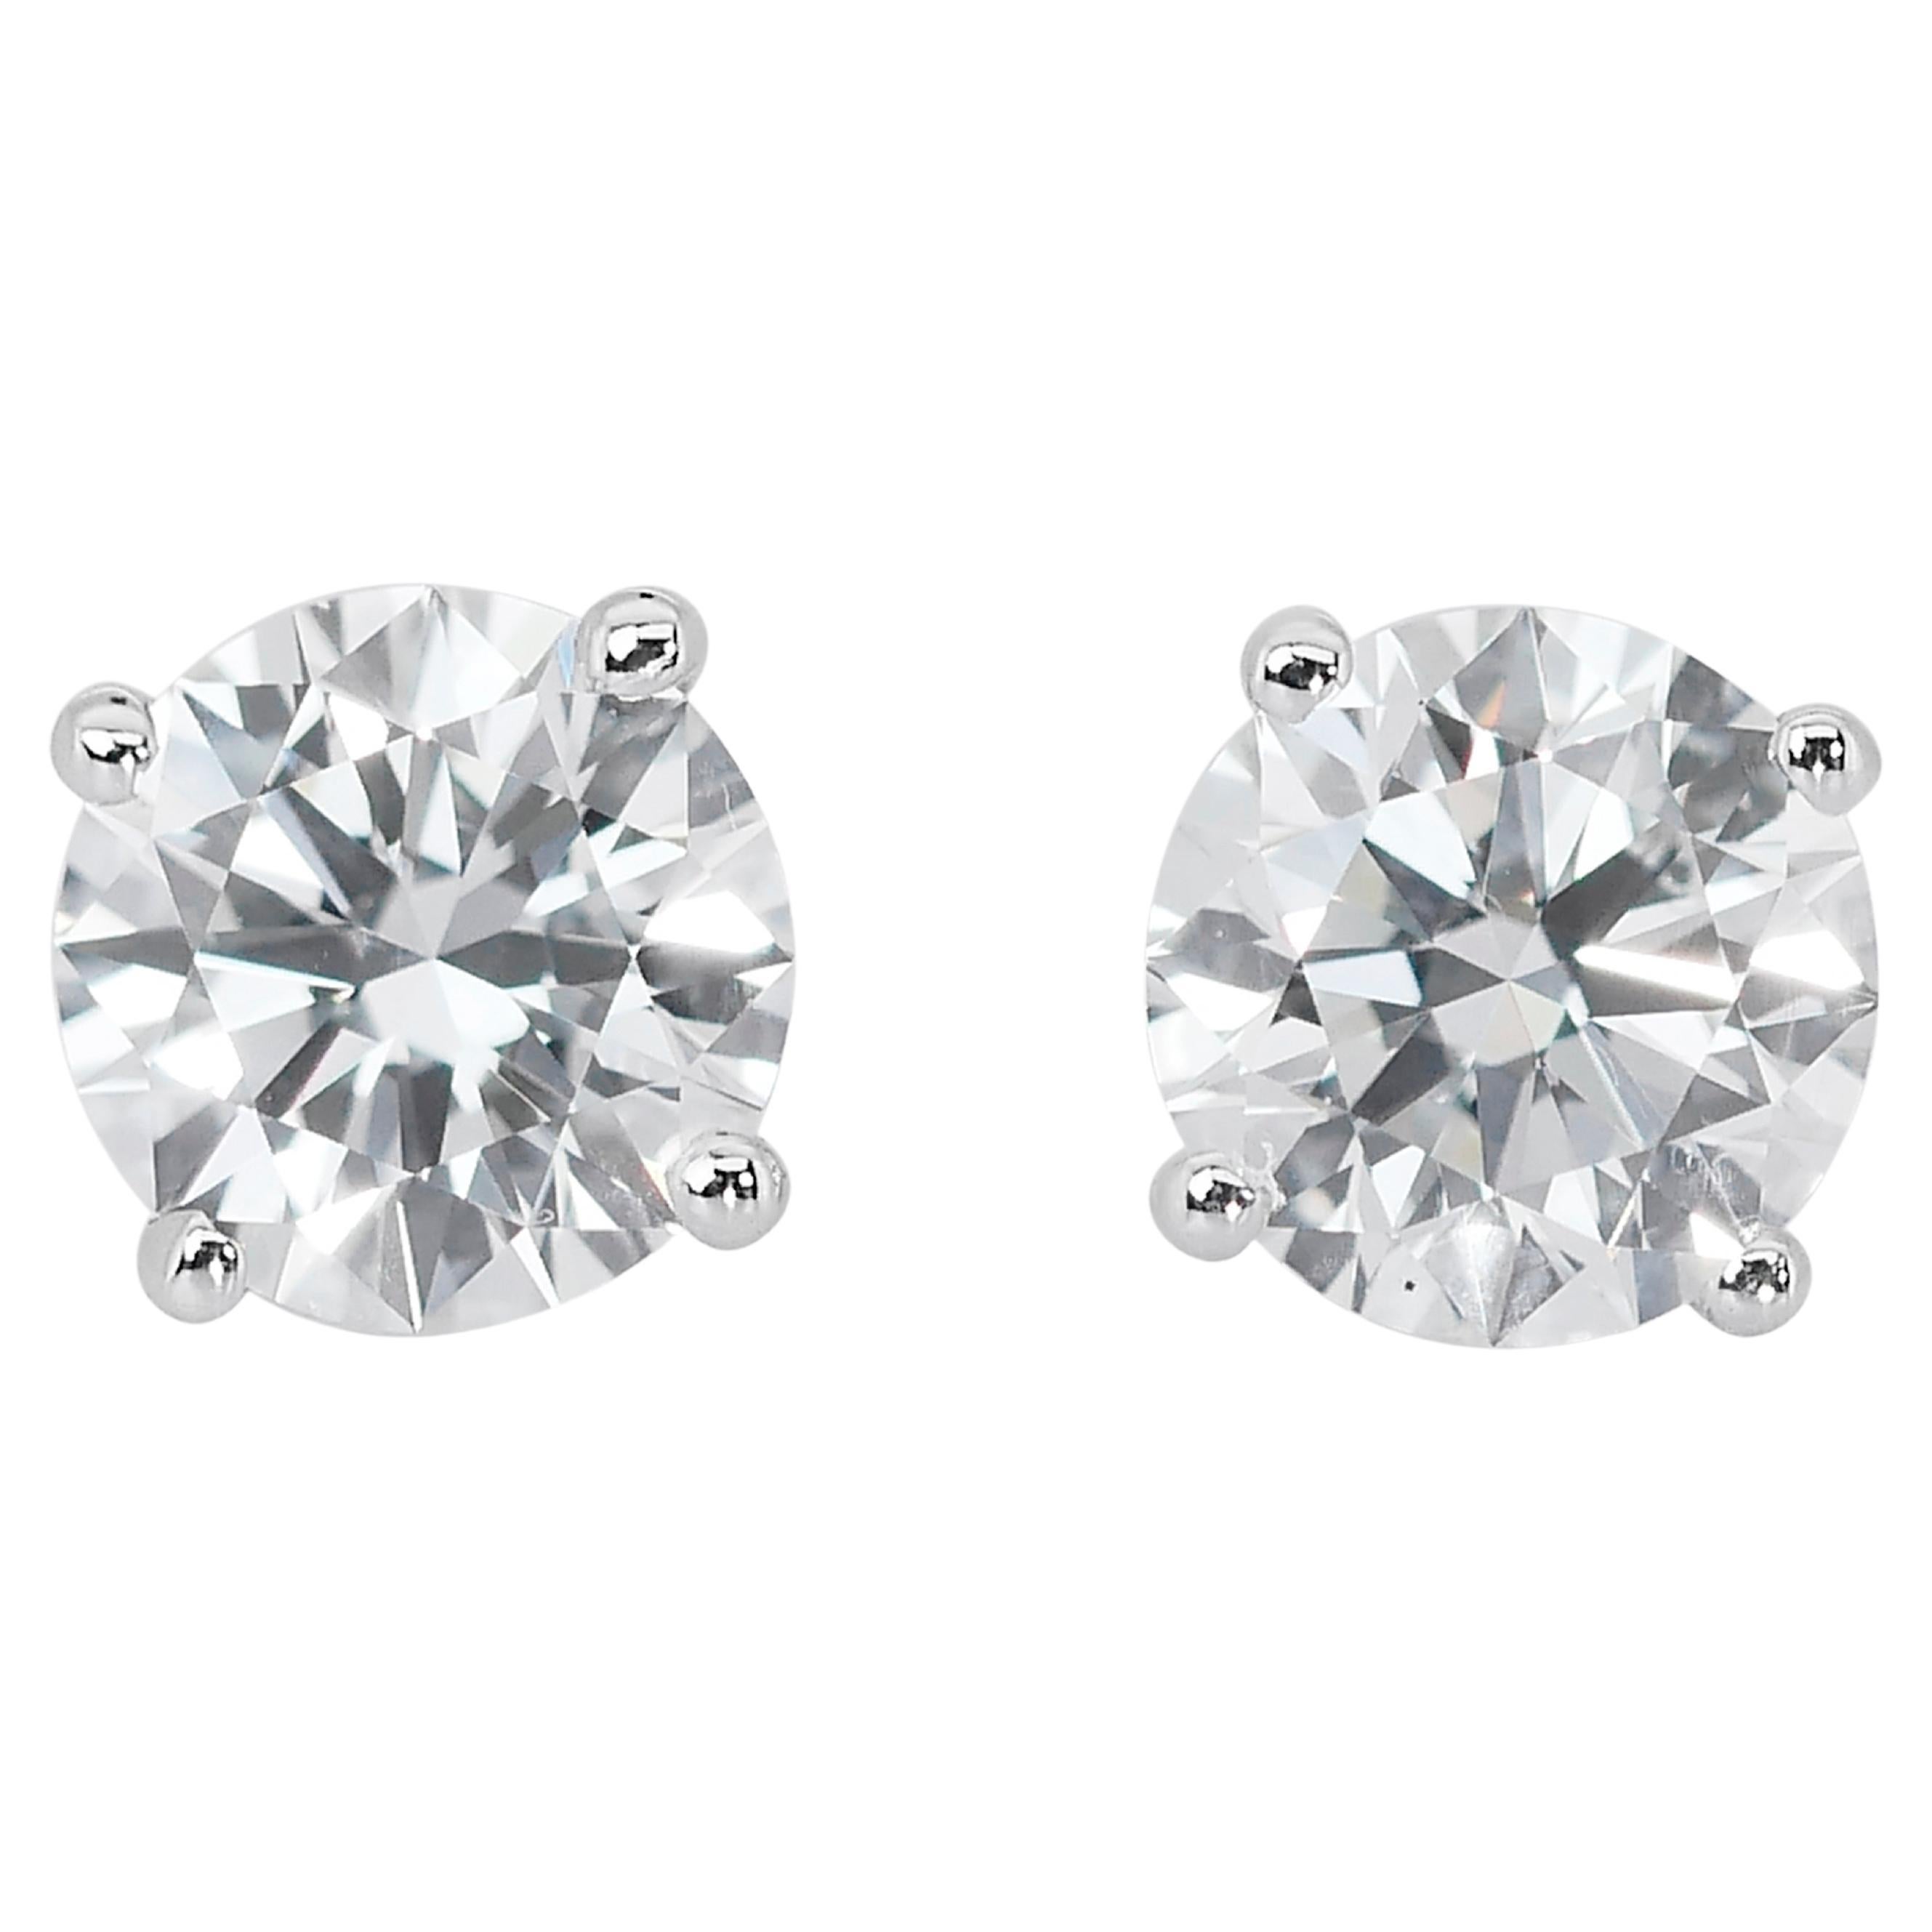 Gleaming 18k White Gold Natural Diamond Stud Earrings w/3.10 ct - GIA Certified For Sale